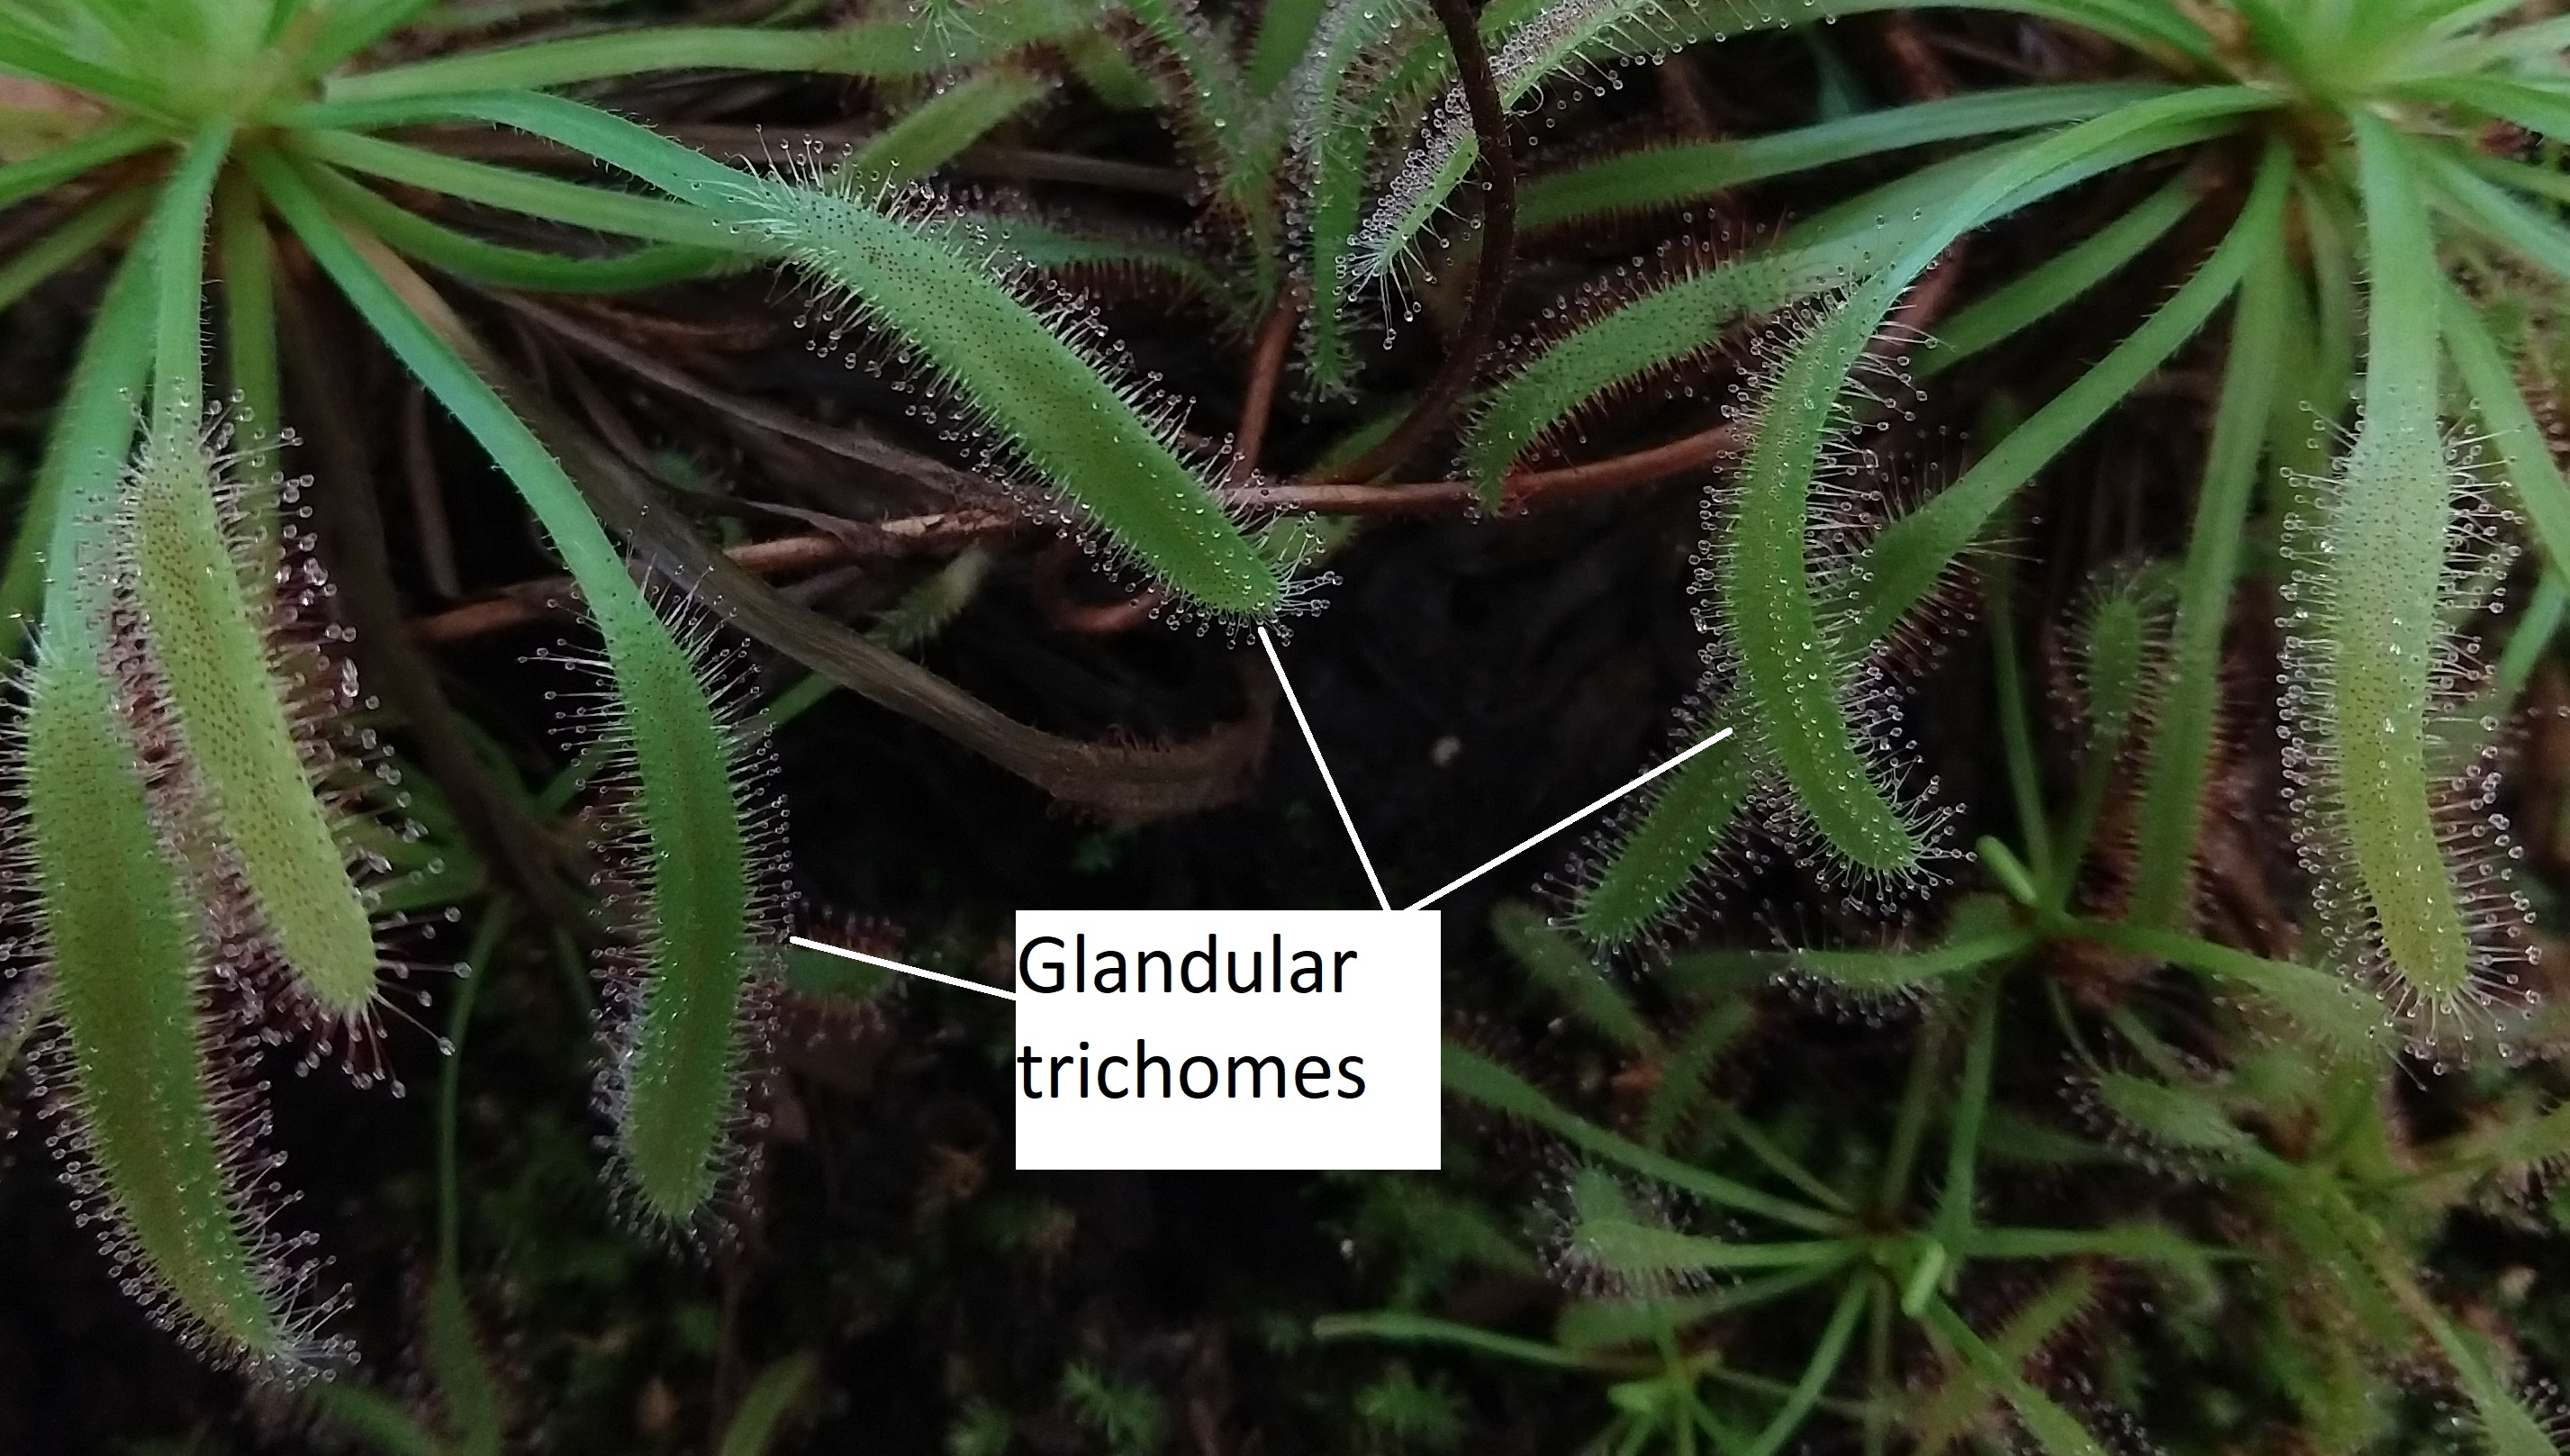 Drosera (sundew) with glandular trichomes to trap insects